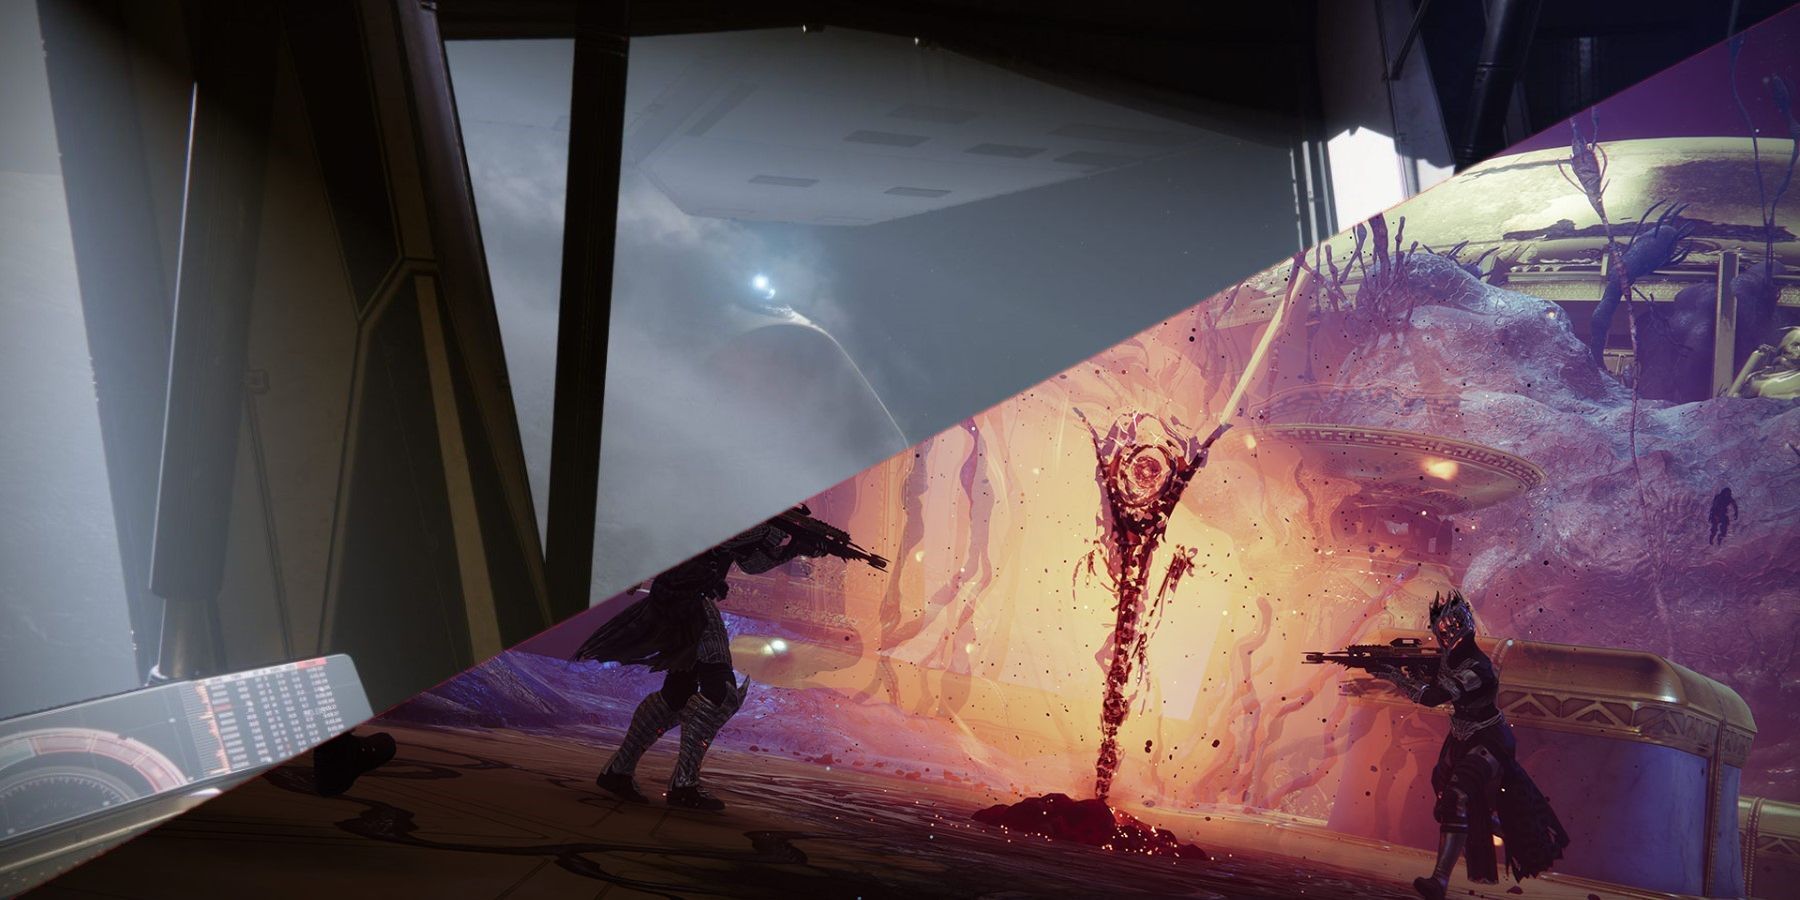 destiny 2 season of the haunted recycled content the leviathan ship raids open area patrol zone nightmares shadowkeep dlc moon sunset weapons crafting